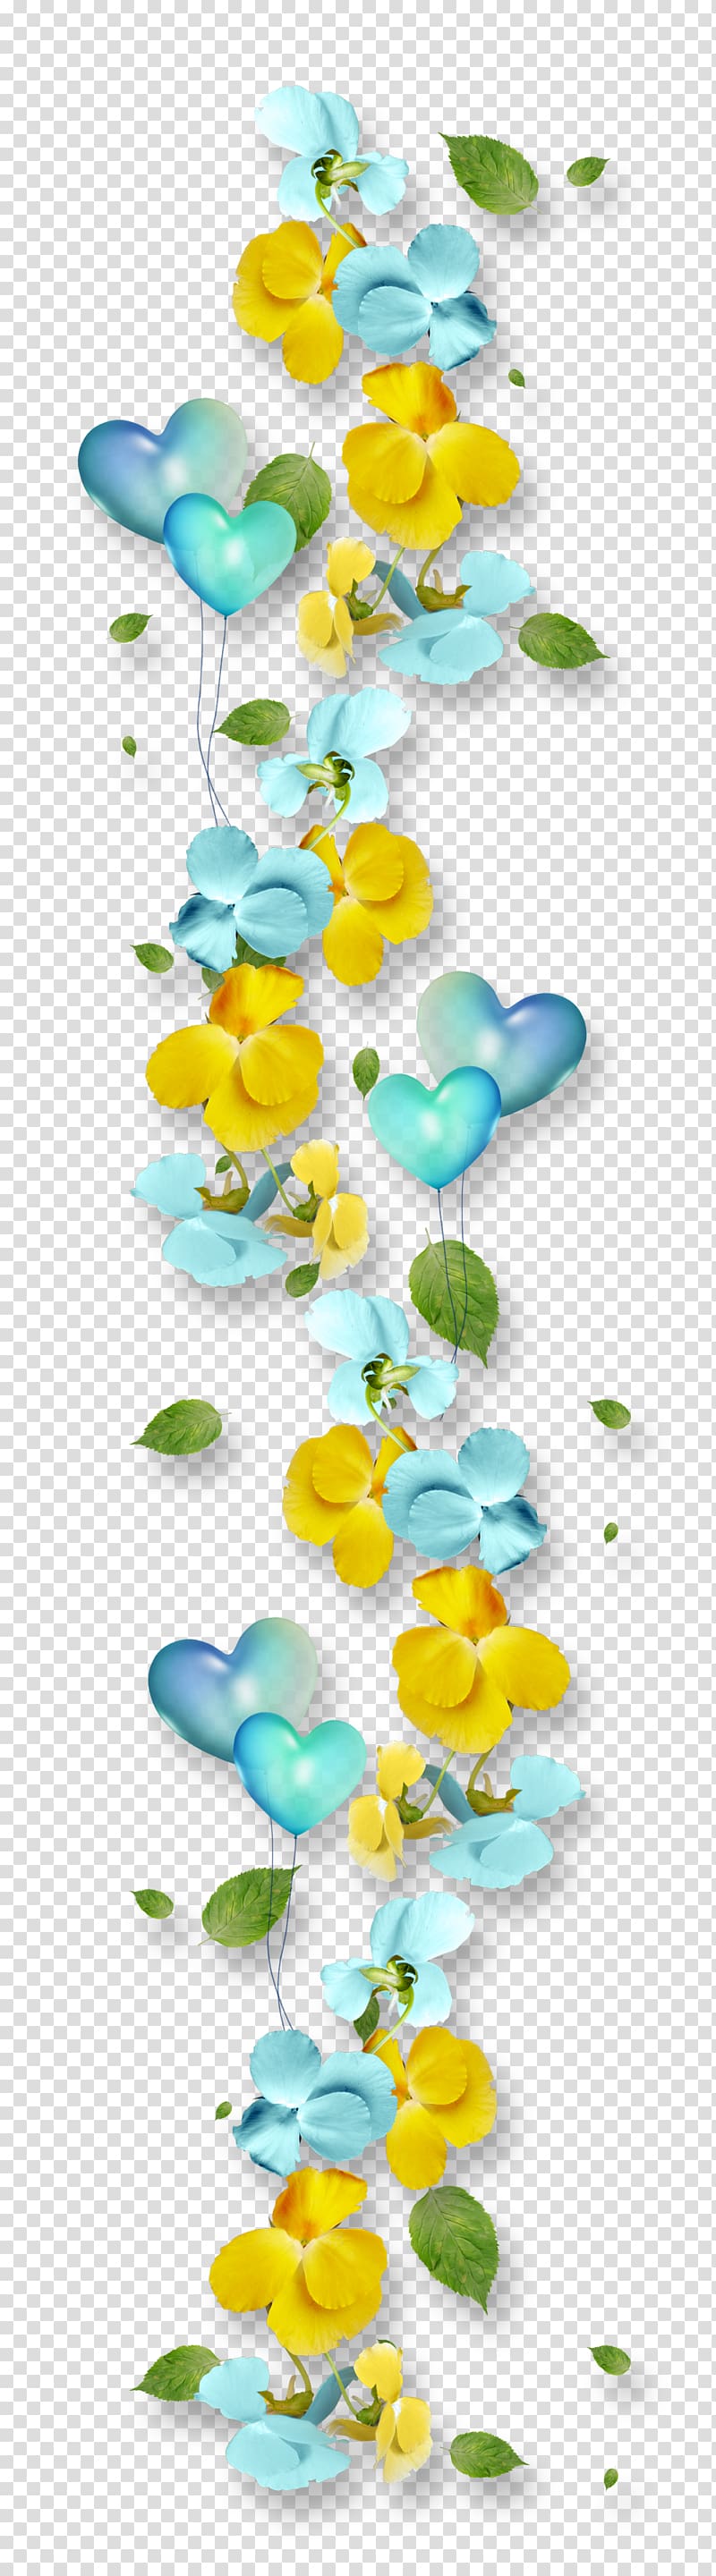 teal and yellow floral illustration, Hermetica Mind Leaf, Leaves Heart transparent background PNG clipart